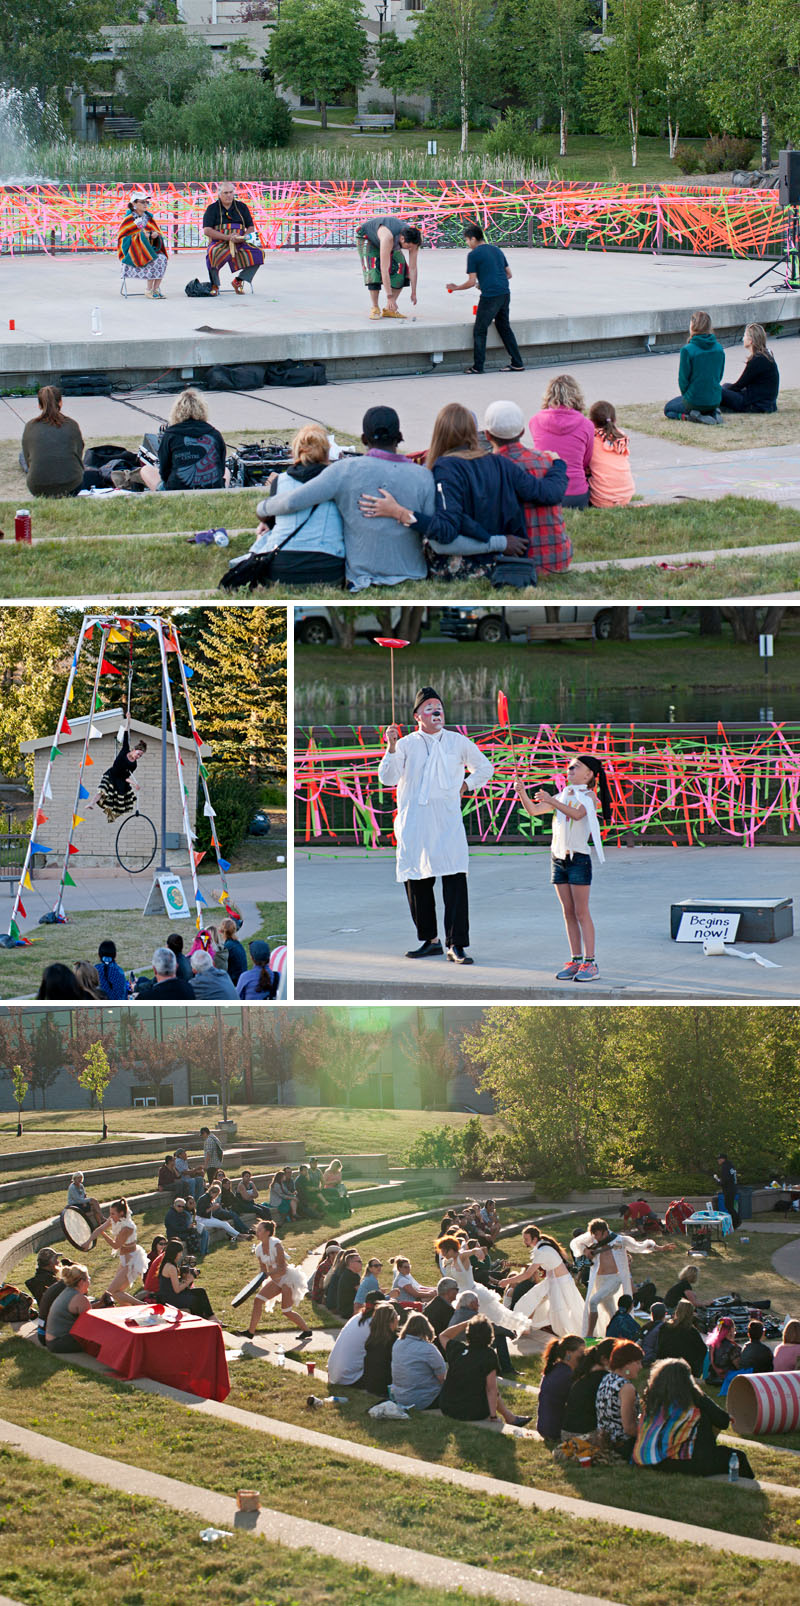 AFTER A FRIENDLY GROUP DINNER, VARIOUS PERFORMANCES AND VIGNETTES WERE SHOWN ON THE MOUNT ROYAL UNIVERSITY AMPHITHEATRE STAGE INCLUDING A NEW WORK FROM JUSTIN MANYFINGERS (TOP), AN AERIAL DANCE FROM JESSICA BARRERA (MIDDLE LEFT), A CLOWN PIECE FROM DEAN BAREHAM (MIDDLE RIGHT), AND AN EXCERPT FROM LA CARAVAN DANCE THEATRE’S LATEST CREATION, FIHI MA FIHI (BOTTOM) | PHOTOS: AMY JO ESPETVEIDT